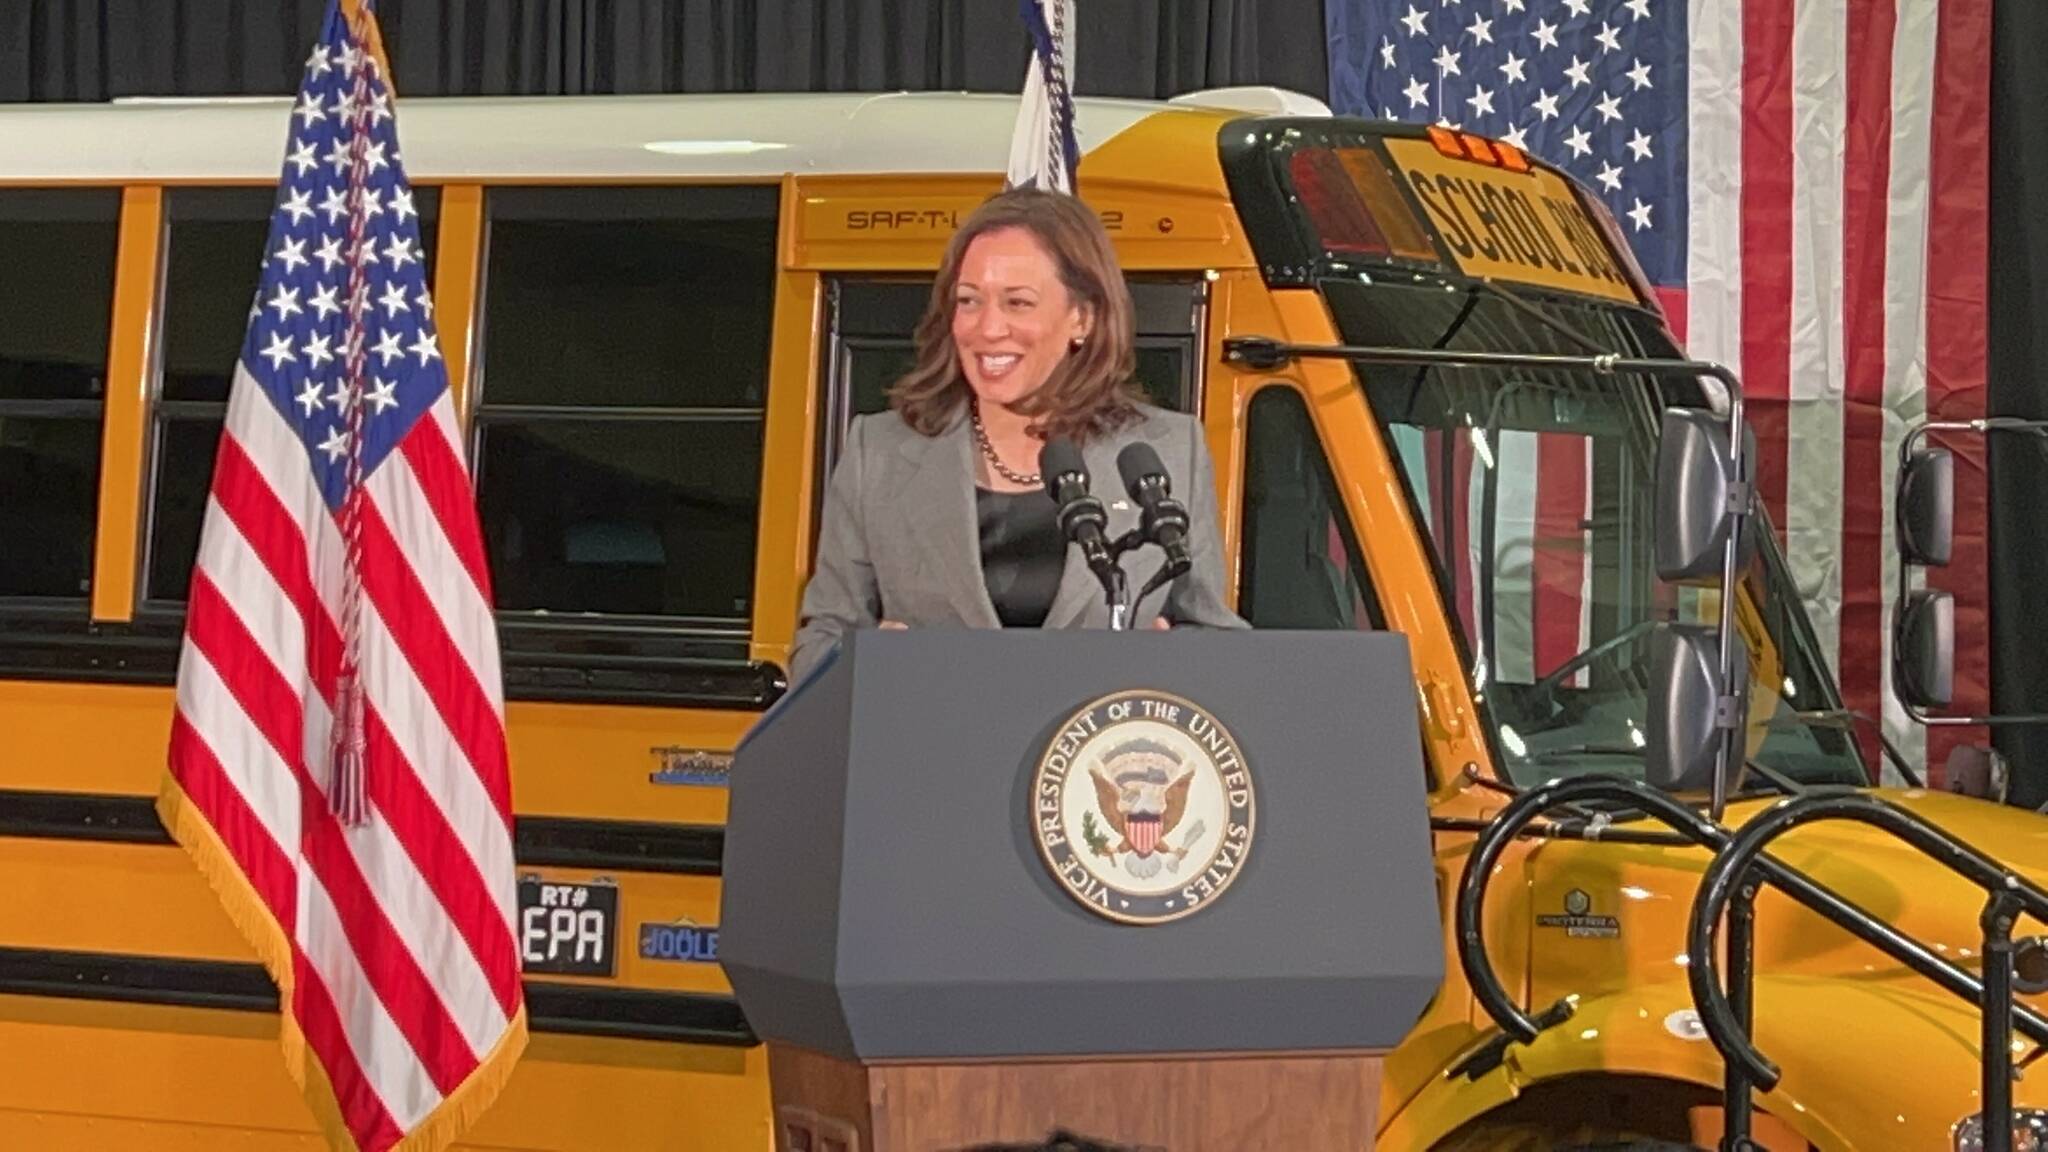 Vice President Kamala Harris announces the first allocation of $1 billion for zero- and low-emission school buses in the country.